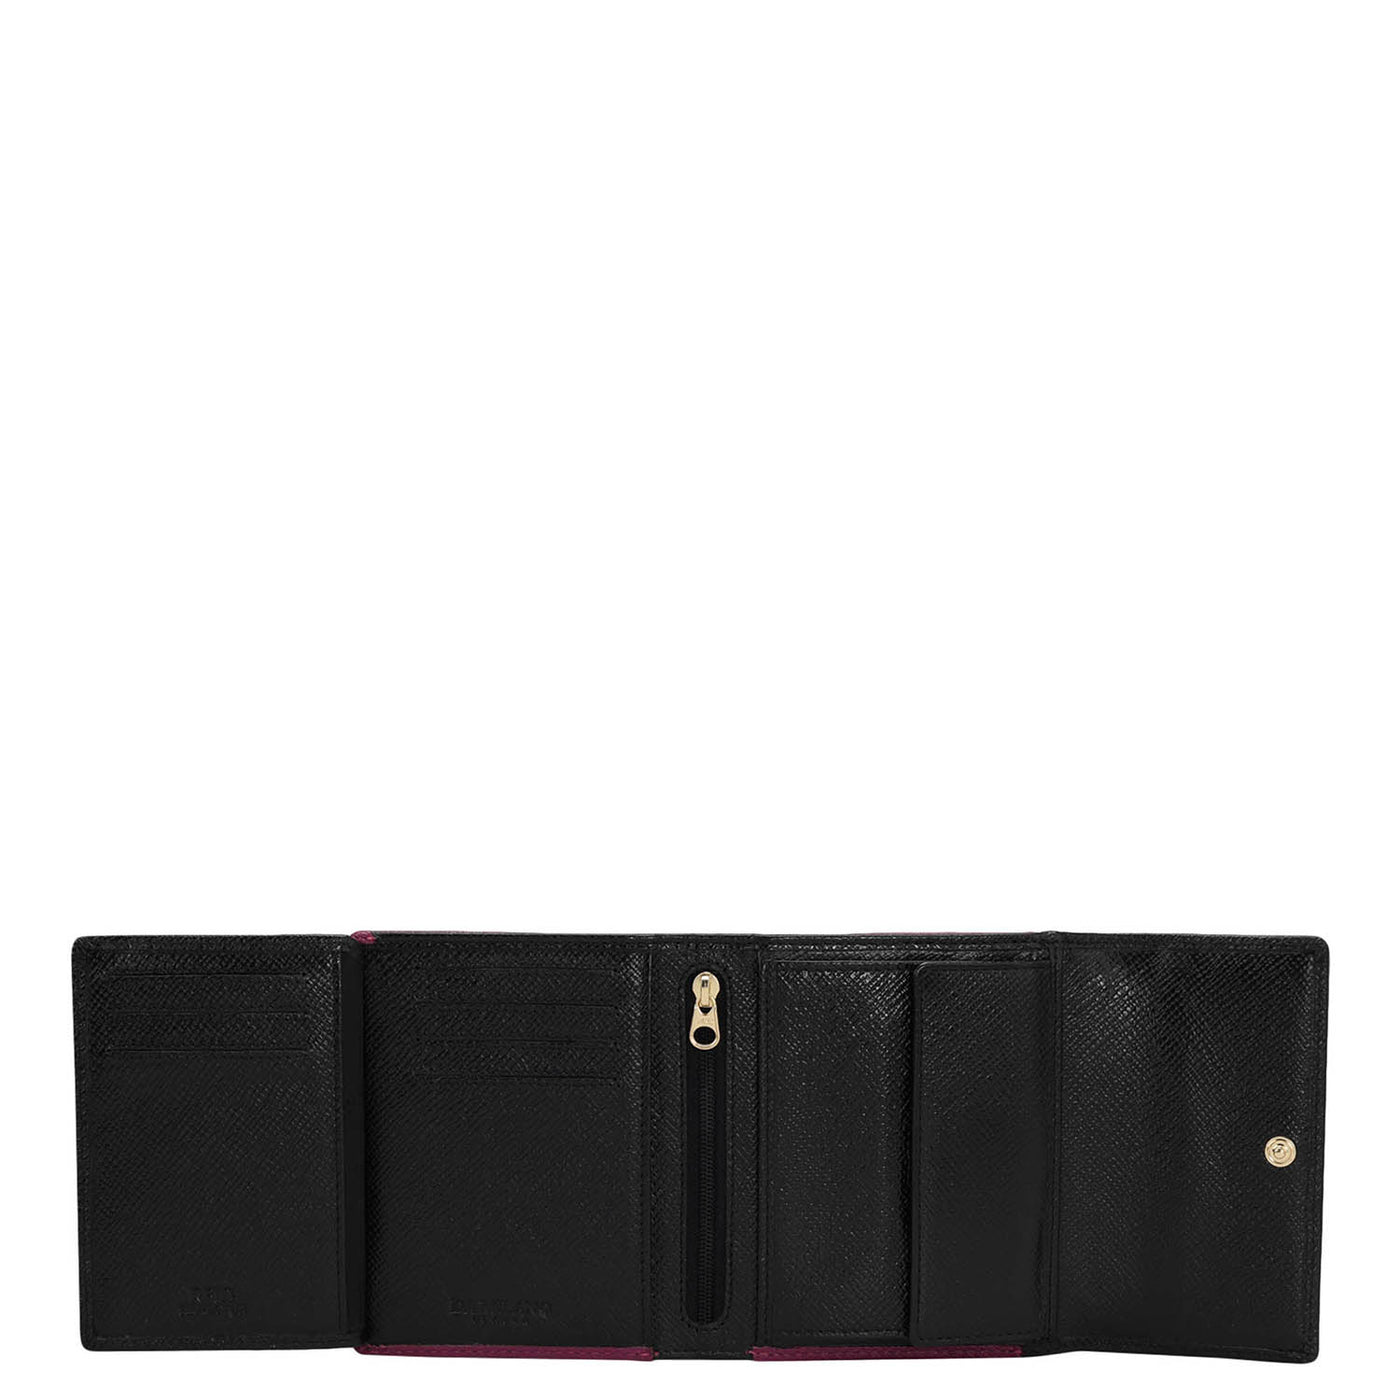 Franzy Leather Ladies Wallet - Orchid & Black